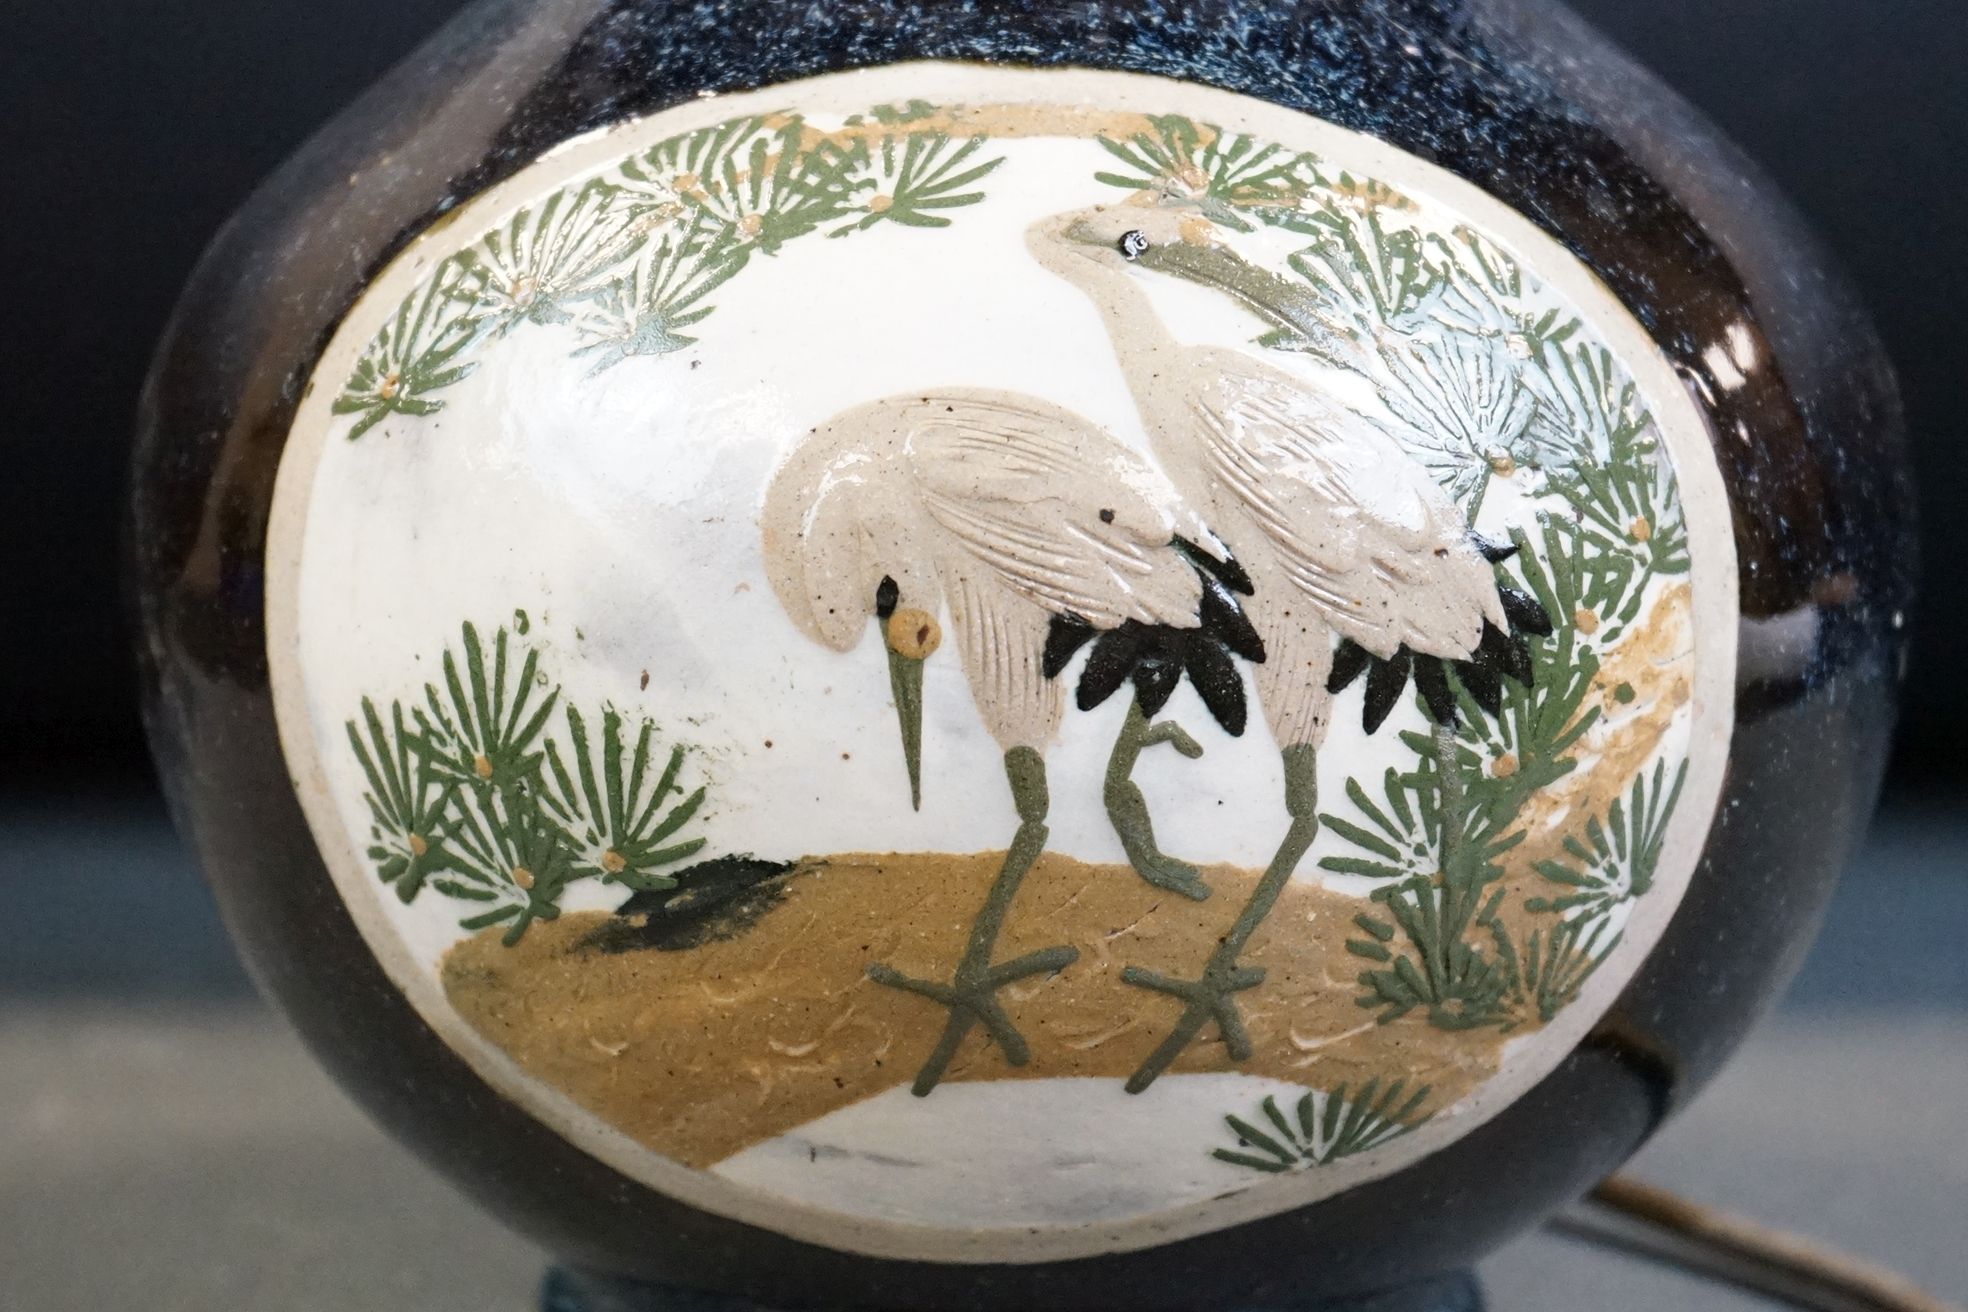 20th Century Pottery bottle vase with relief moulded stork panel decoration on a mottled blue - Image 2 of 4